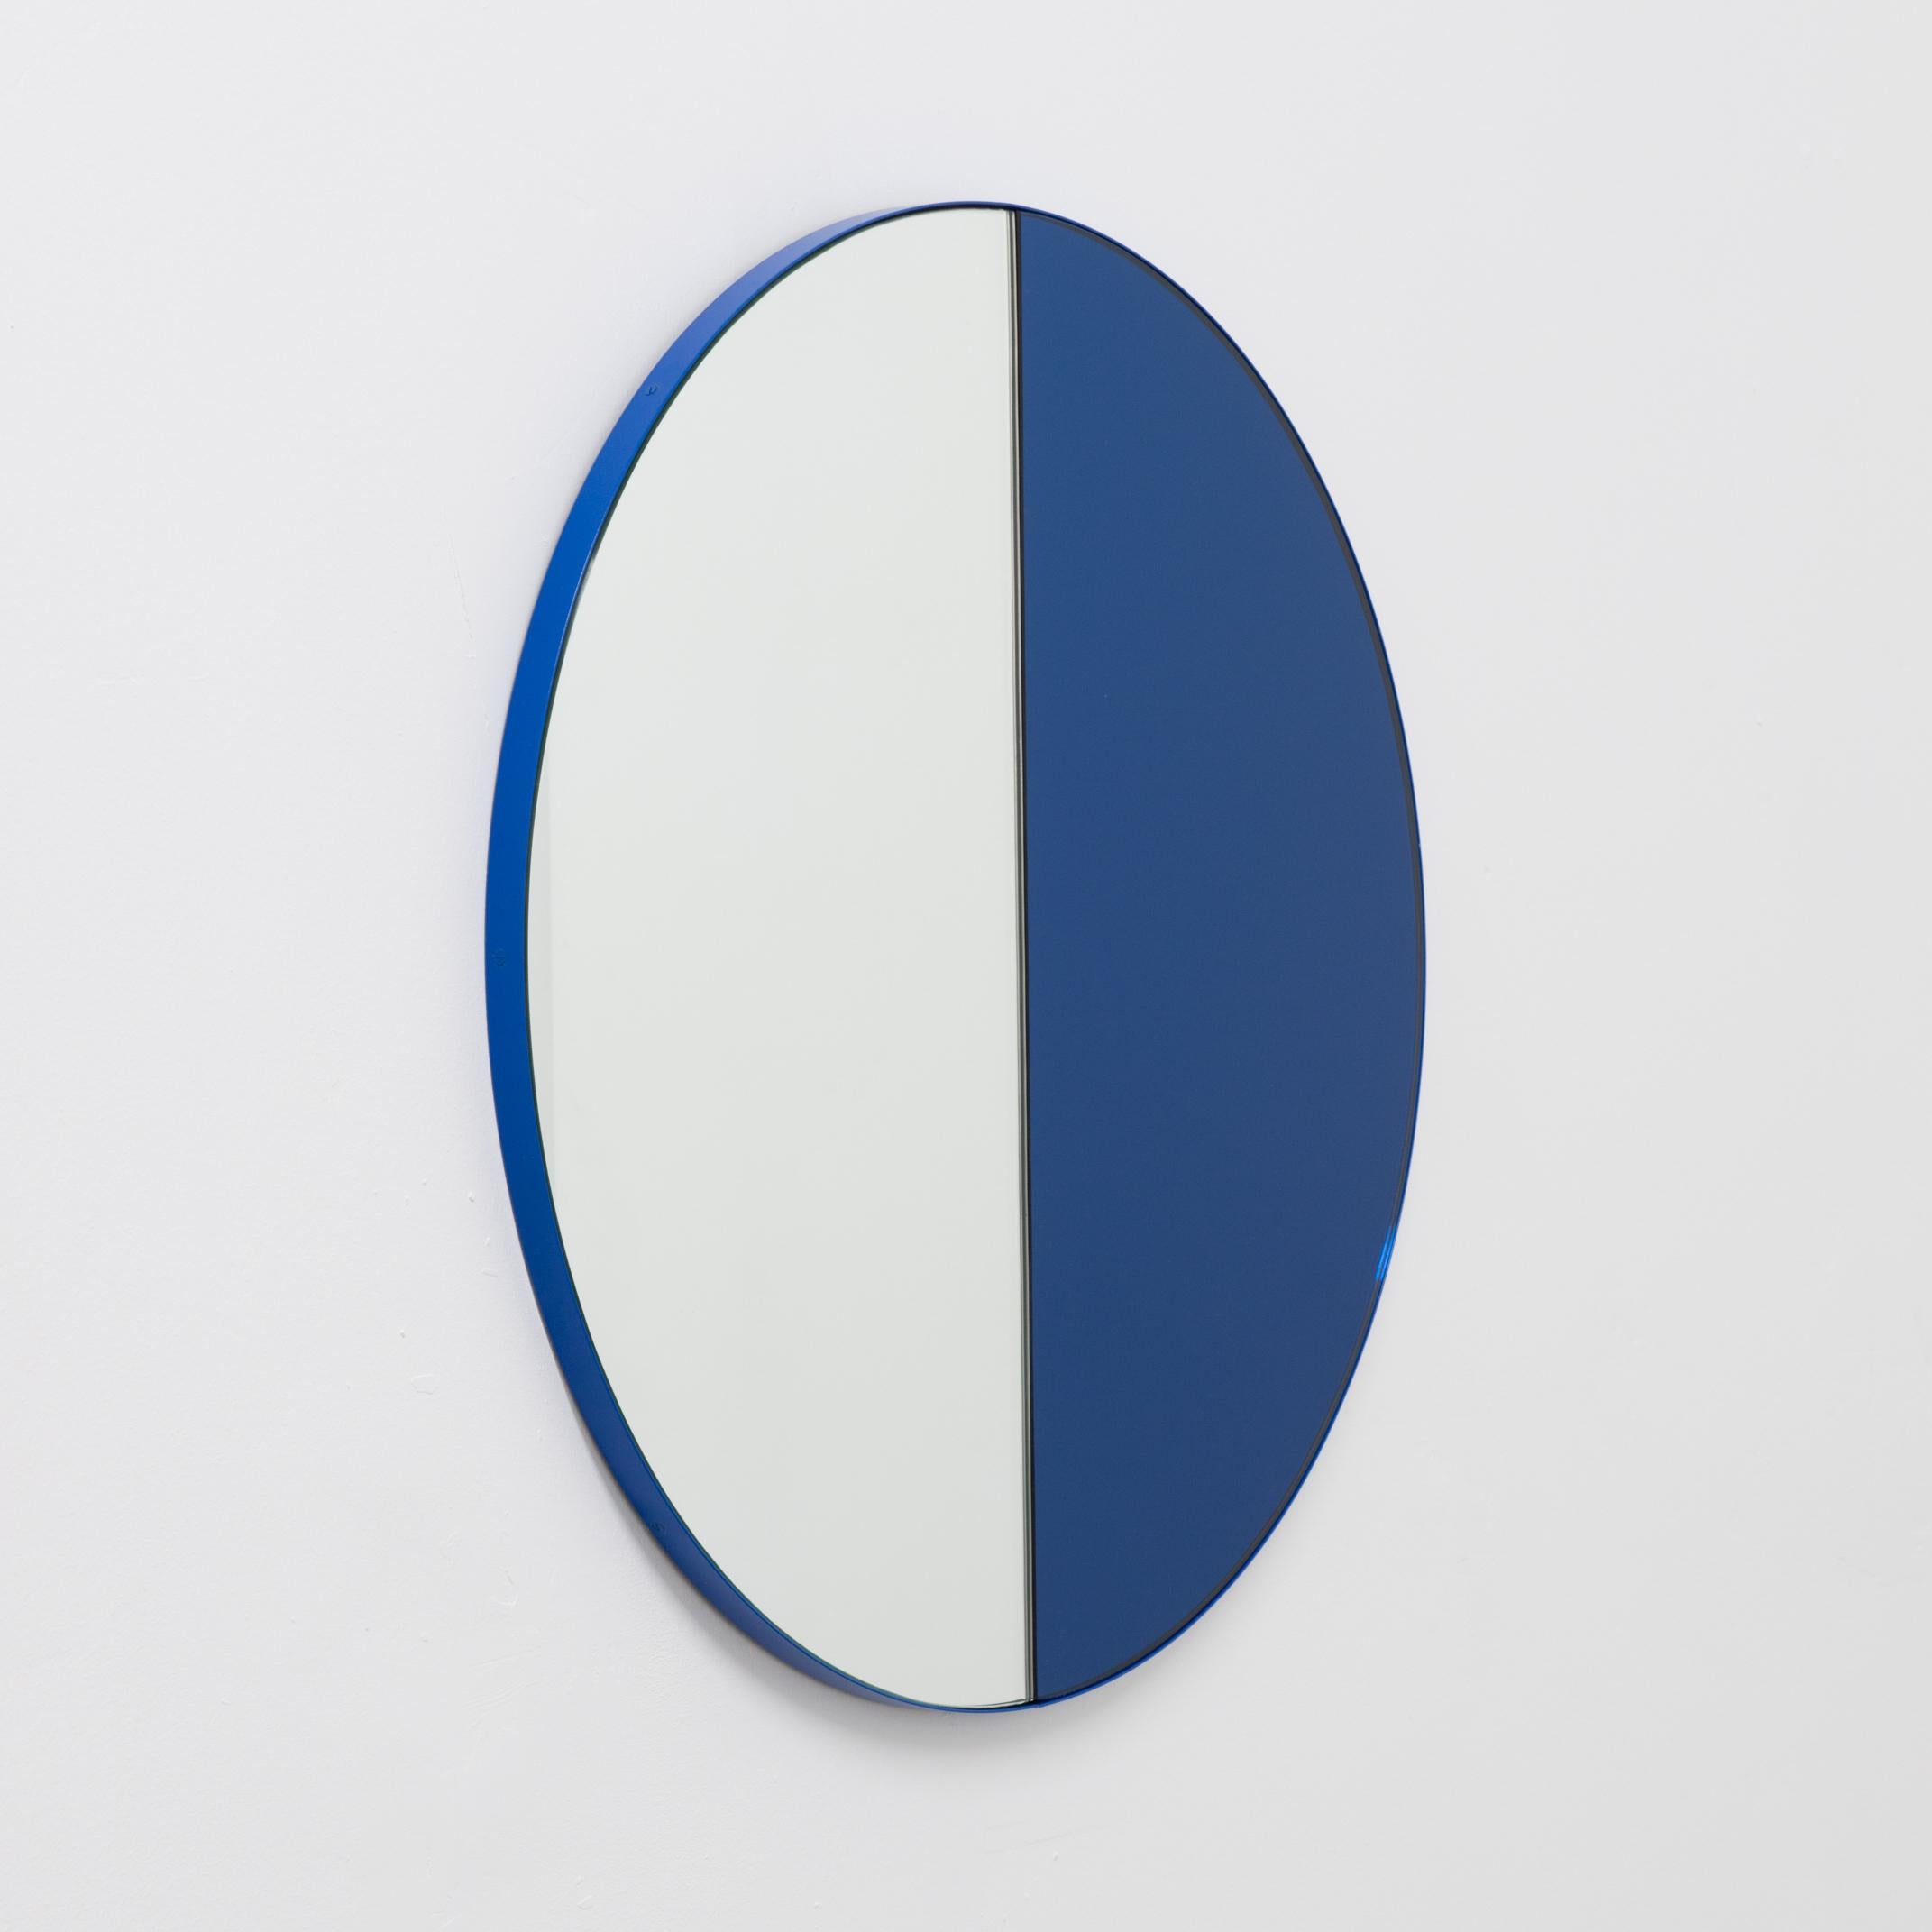 In Stock Orbis Dualis Blue and Silver Tint Round Mirror with Blue Frame, Medium In New Condition For Sale In London, GB